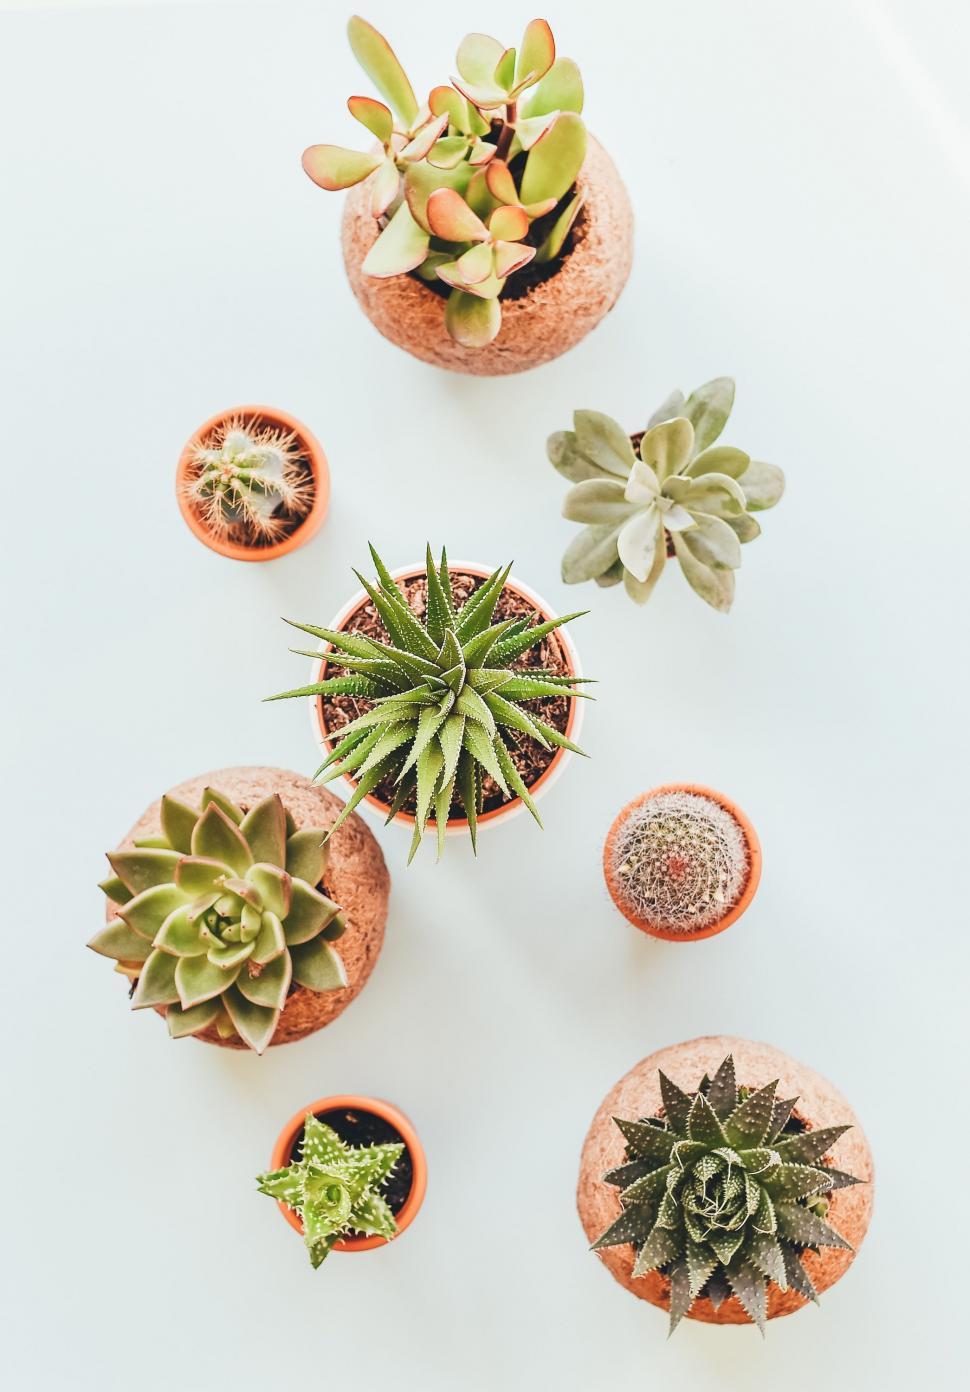 Free Image of Group of Succulents Stacked Together 